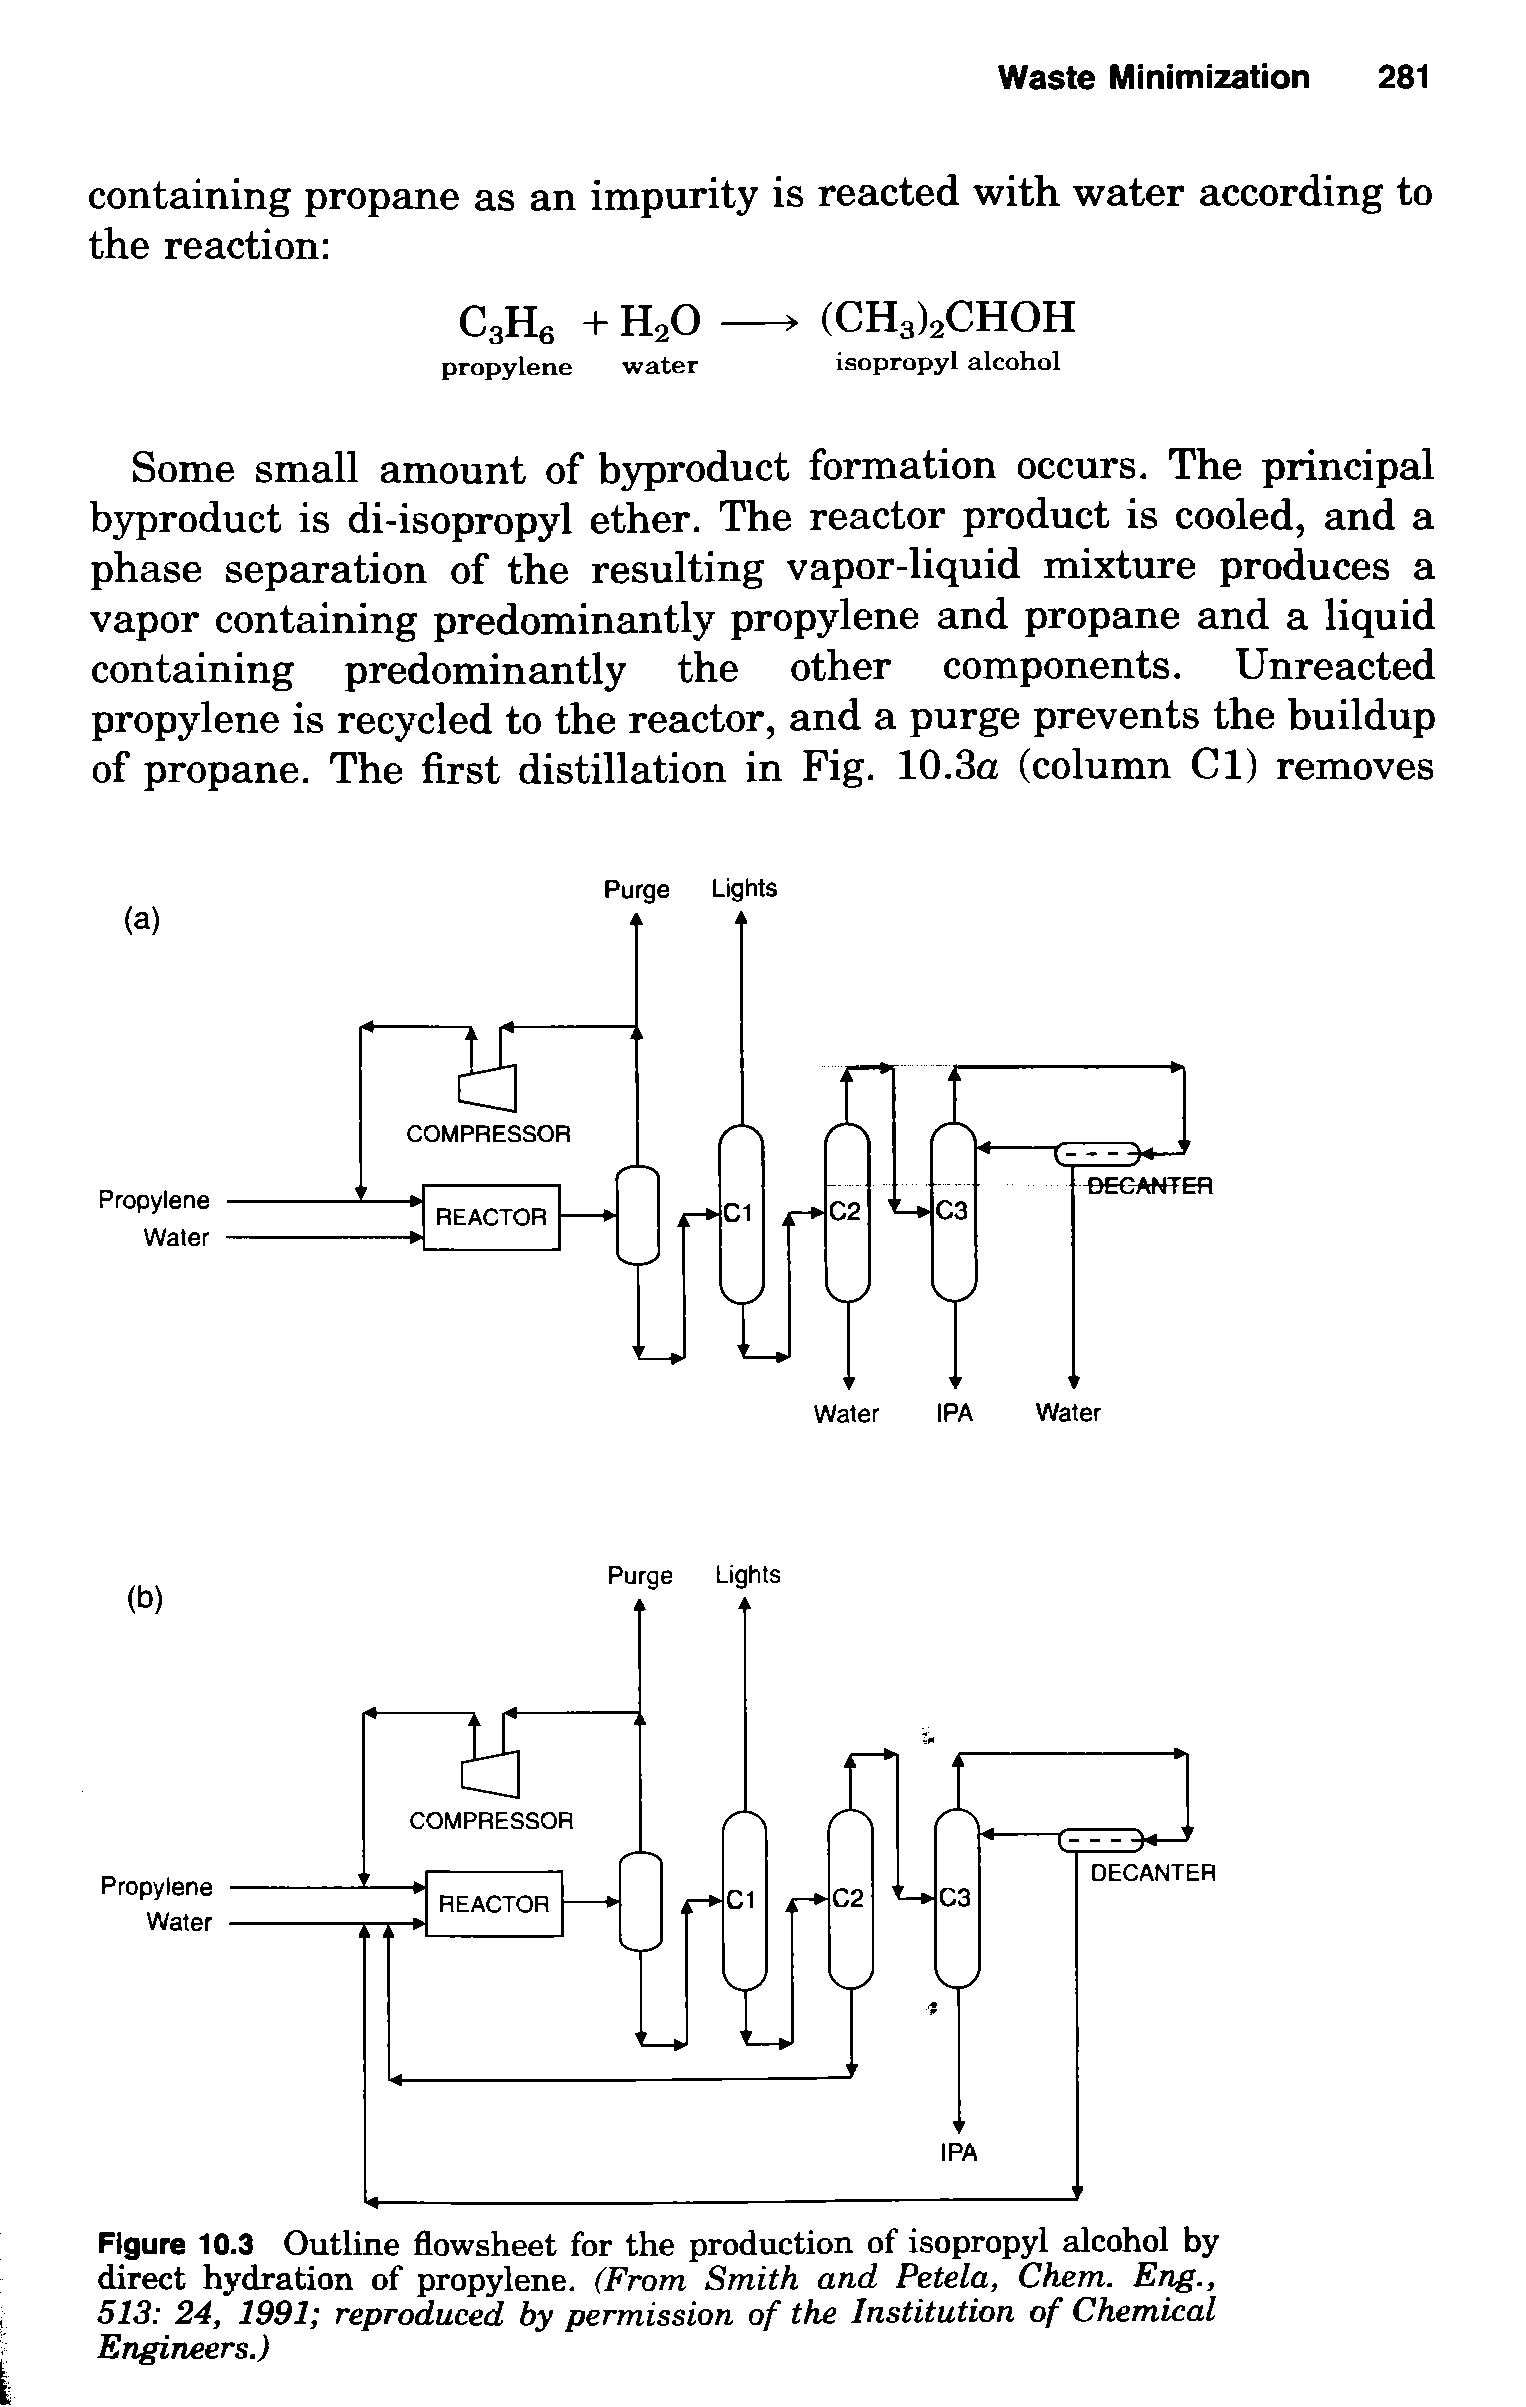 Figure 10.3 Outline flowsheet for the production of isopropyl alcohol by direct hydration of propylene. (From Smith and Petela, Chem. Eng., 513 24, 1991 reproduced by permission of the Institution of Chemical Engineers.)...